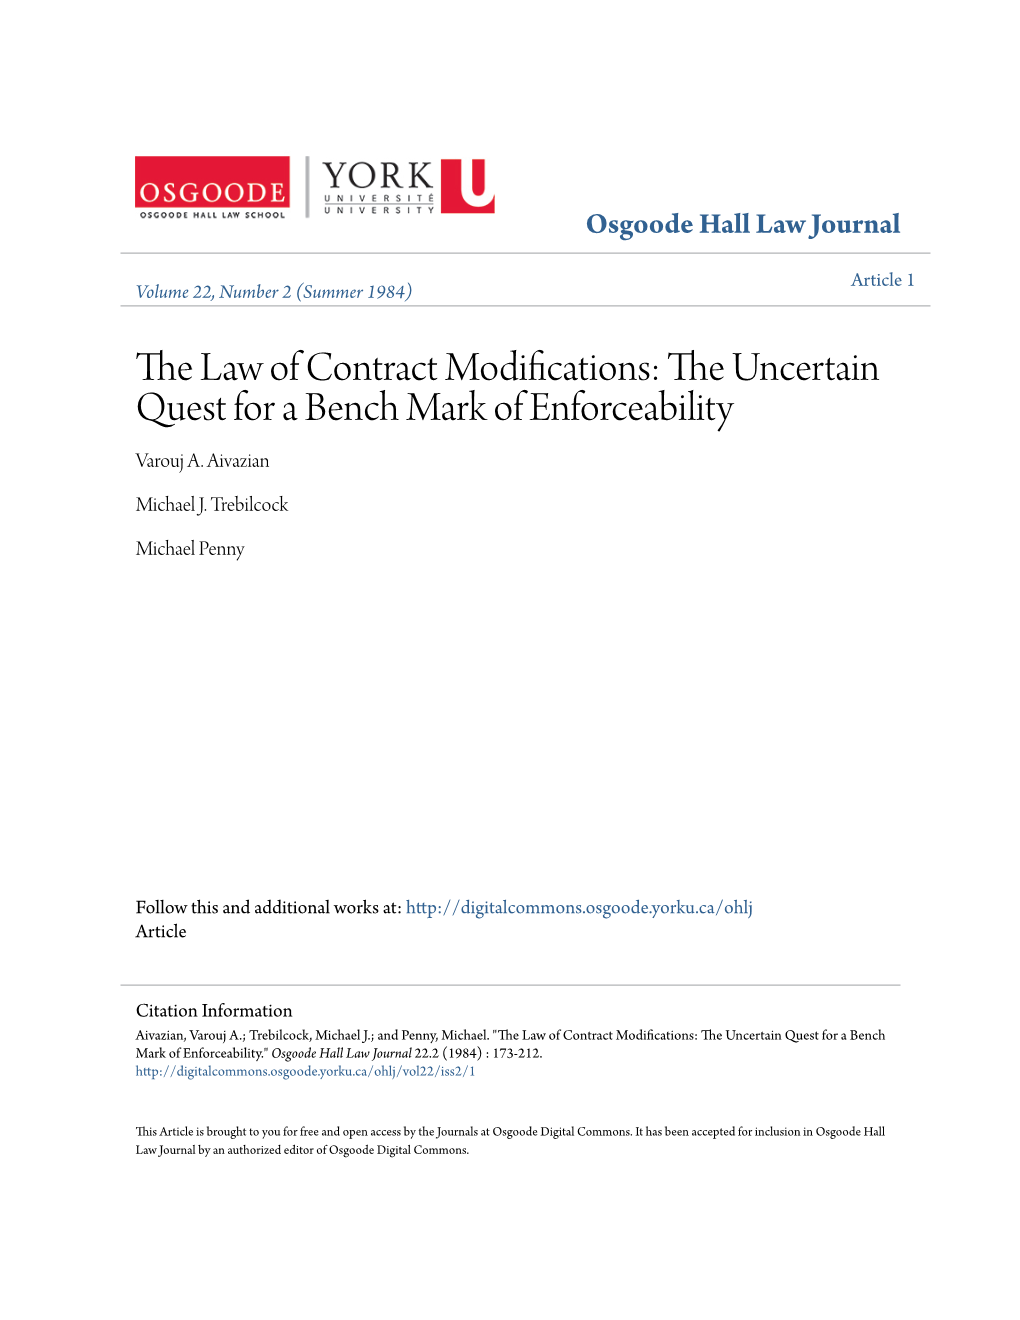 The Law of Contract Modifications: the Uncertain Quest for a Bench Mark of Enforceability